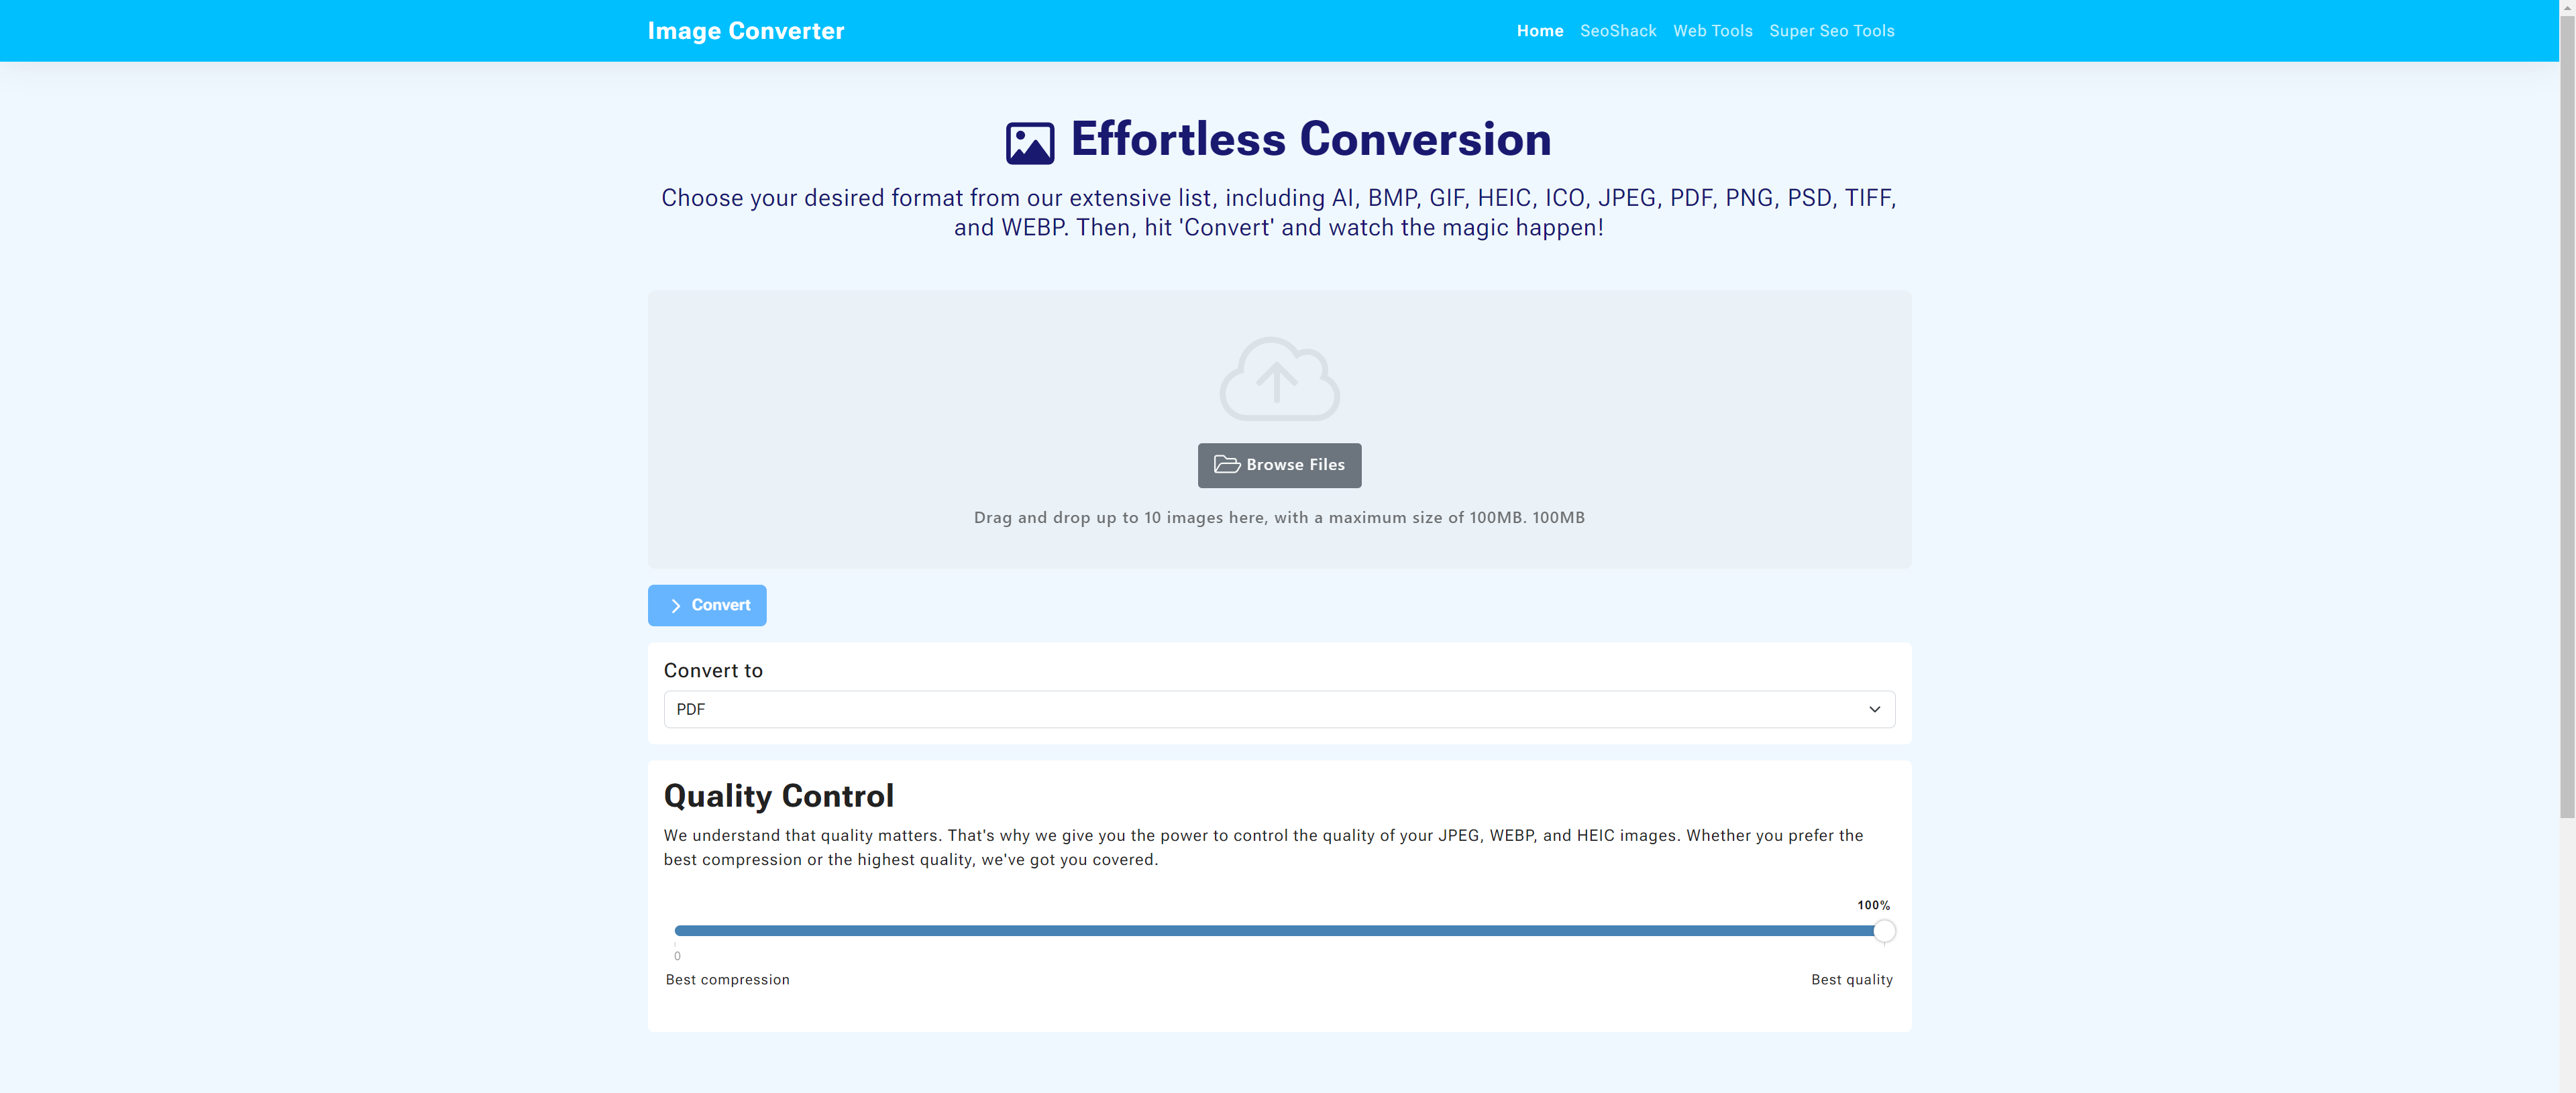 Homepage of Image Converter to PDF Online for Free - Easily Convert JPGs to PDFs!